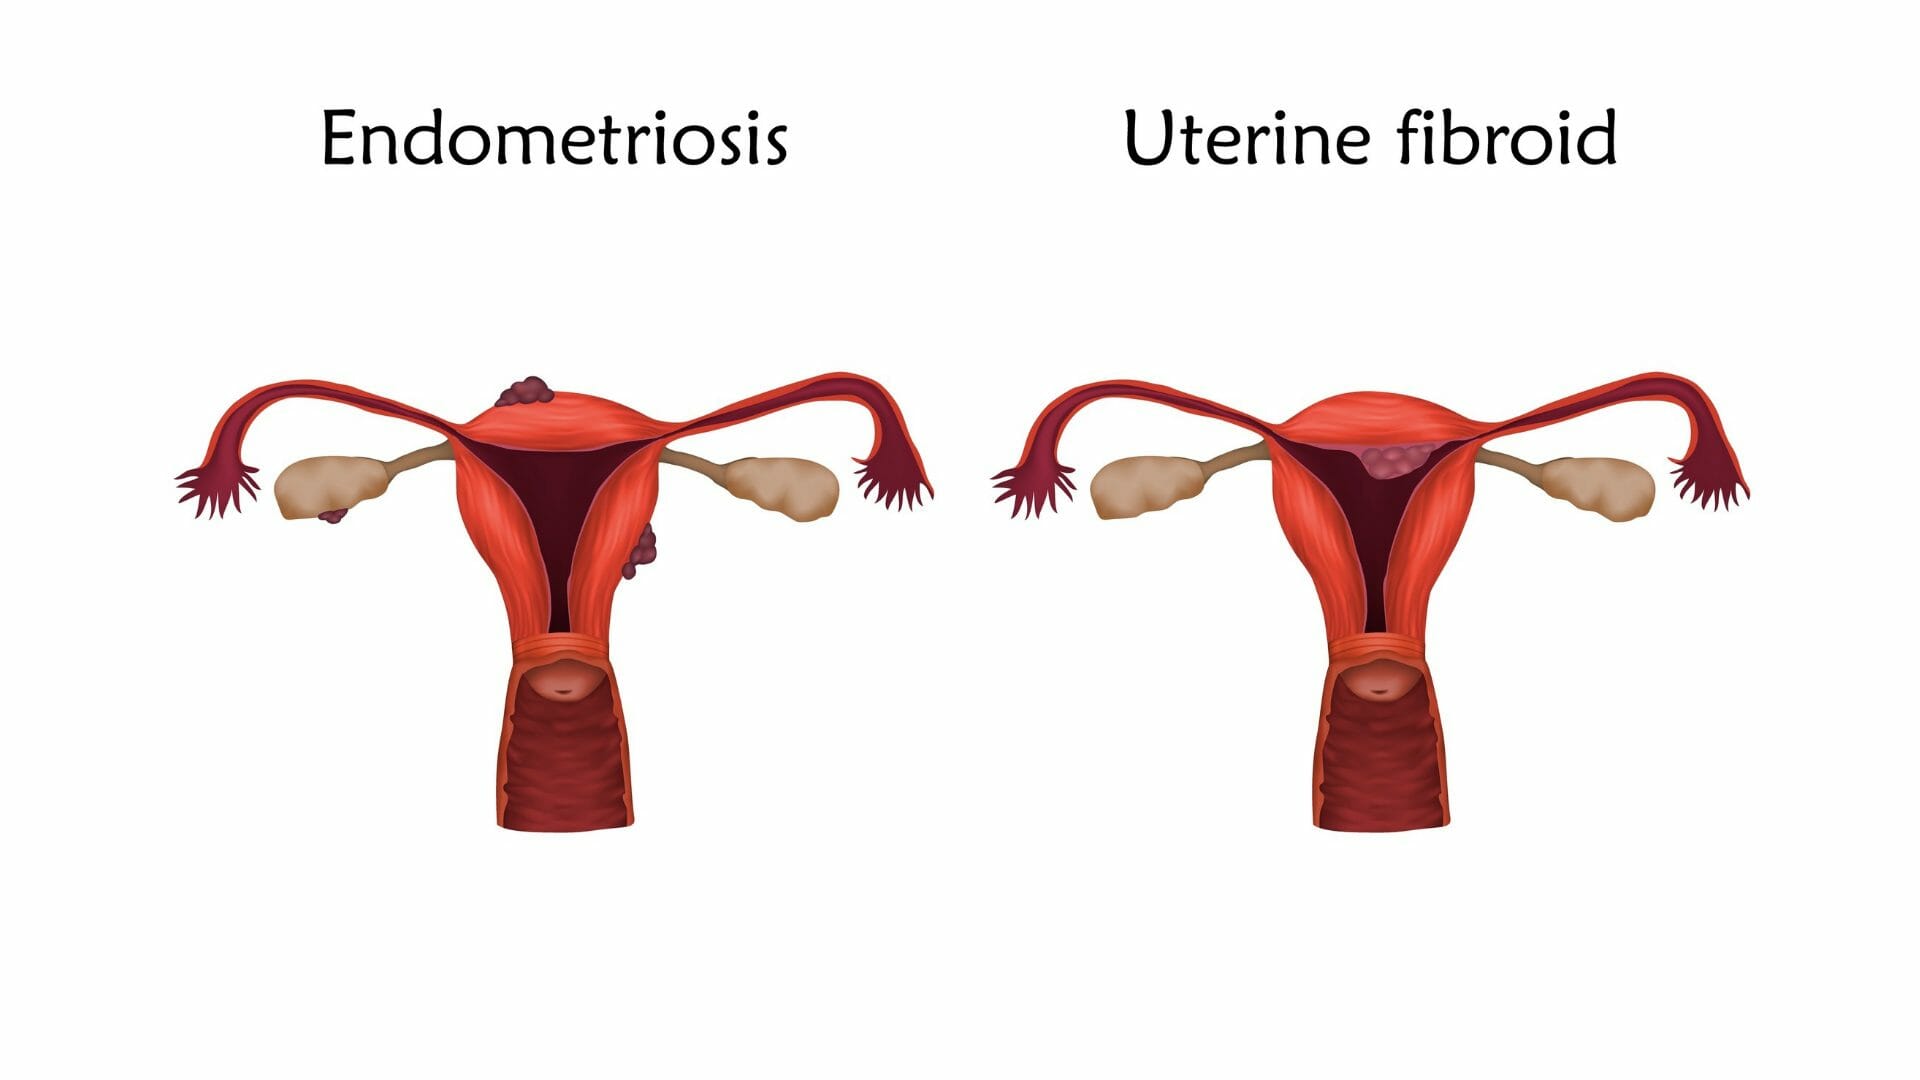 Benefits and risks associated with uterine embolization treatment